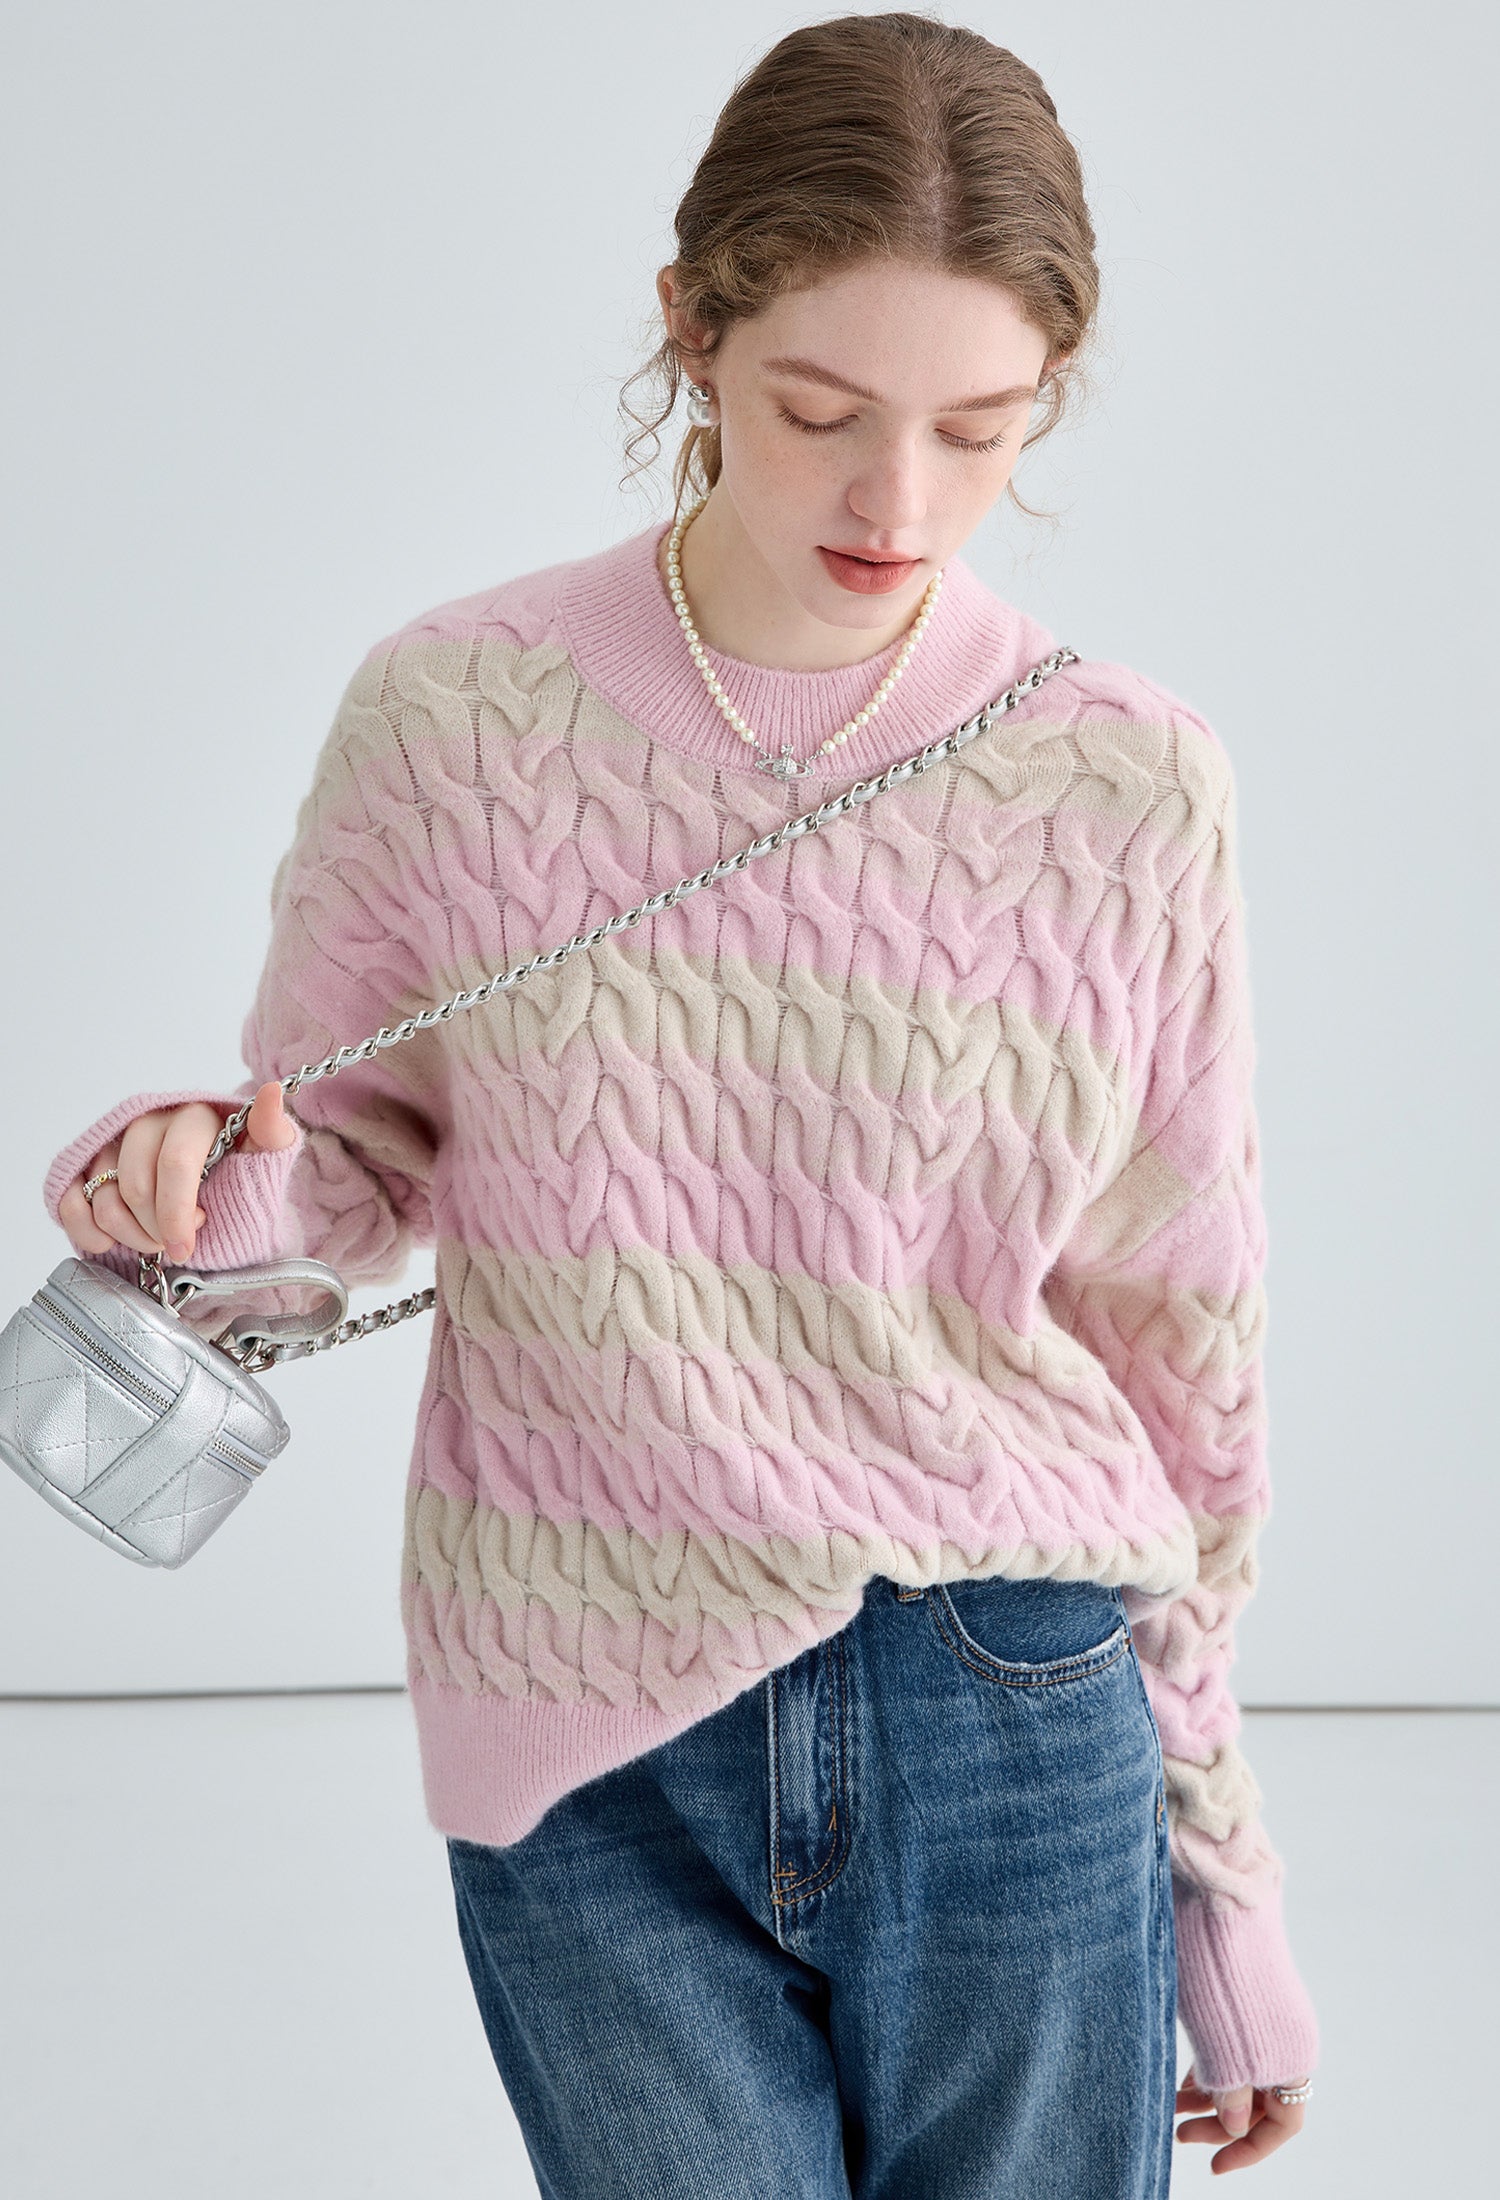 stripe,cable,knit,sweater,strawberry,pink,grey,simple,cute,cool,sexy,mode